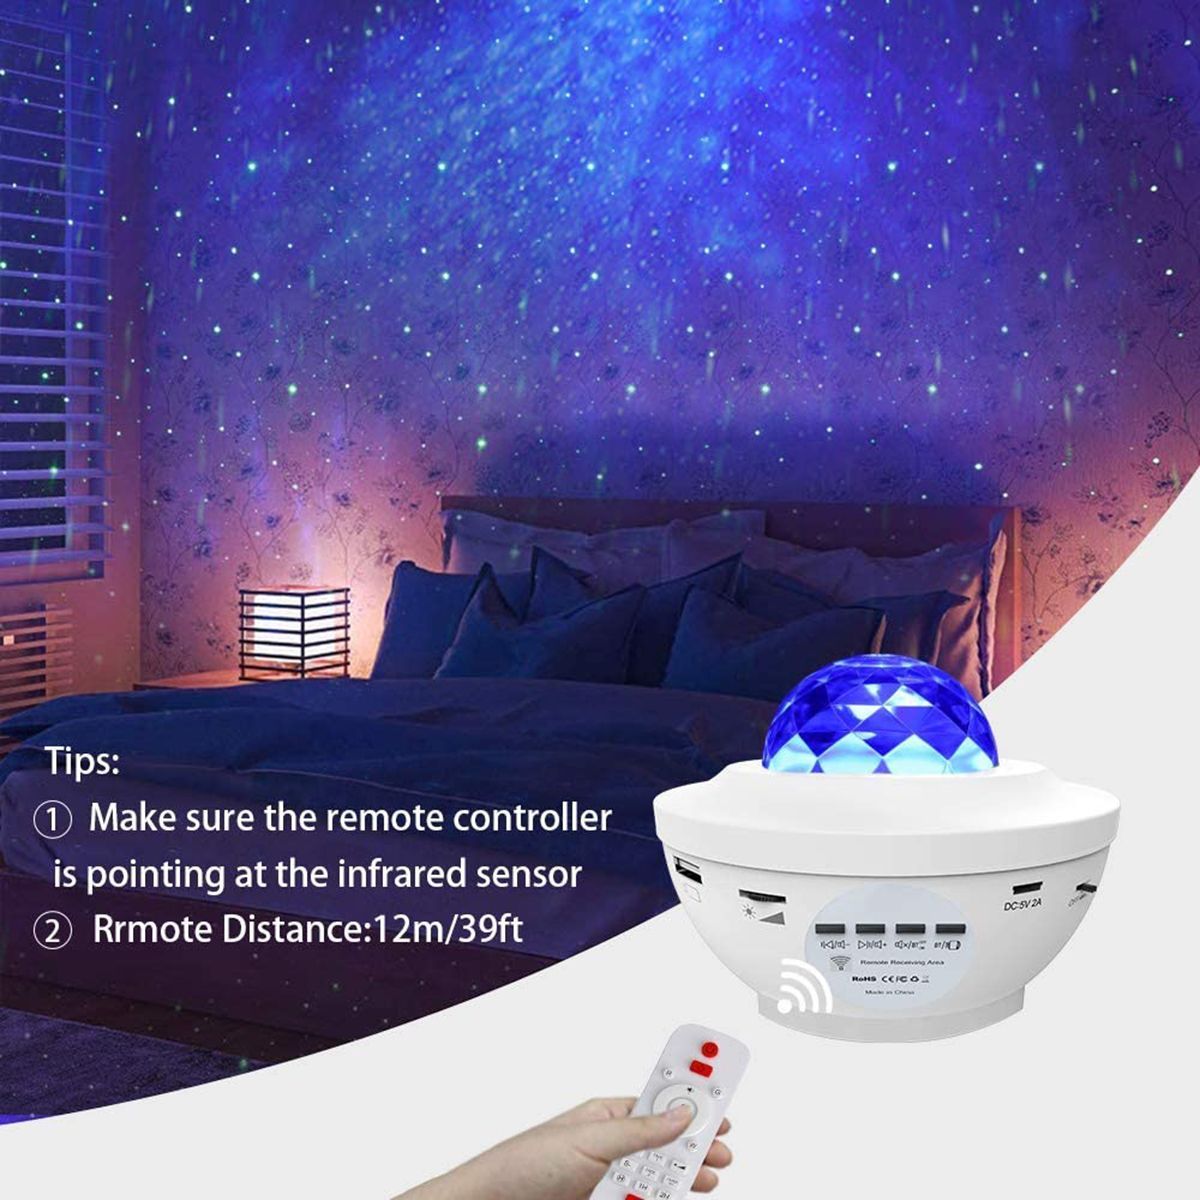 Kids-Room-LED-BT-Night-Light-Star-Sky-Projector-Lamp-Rotating-Starry-Baby-Gifts-1729896